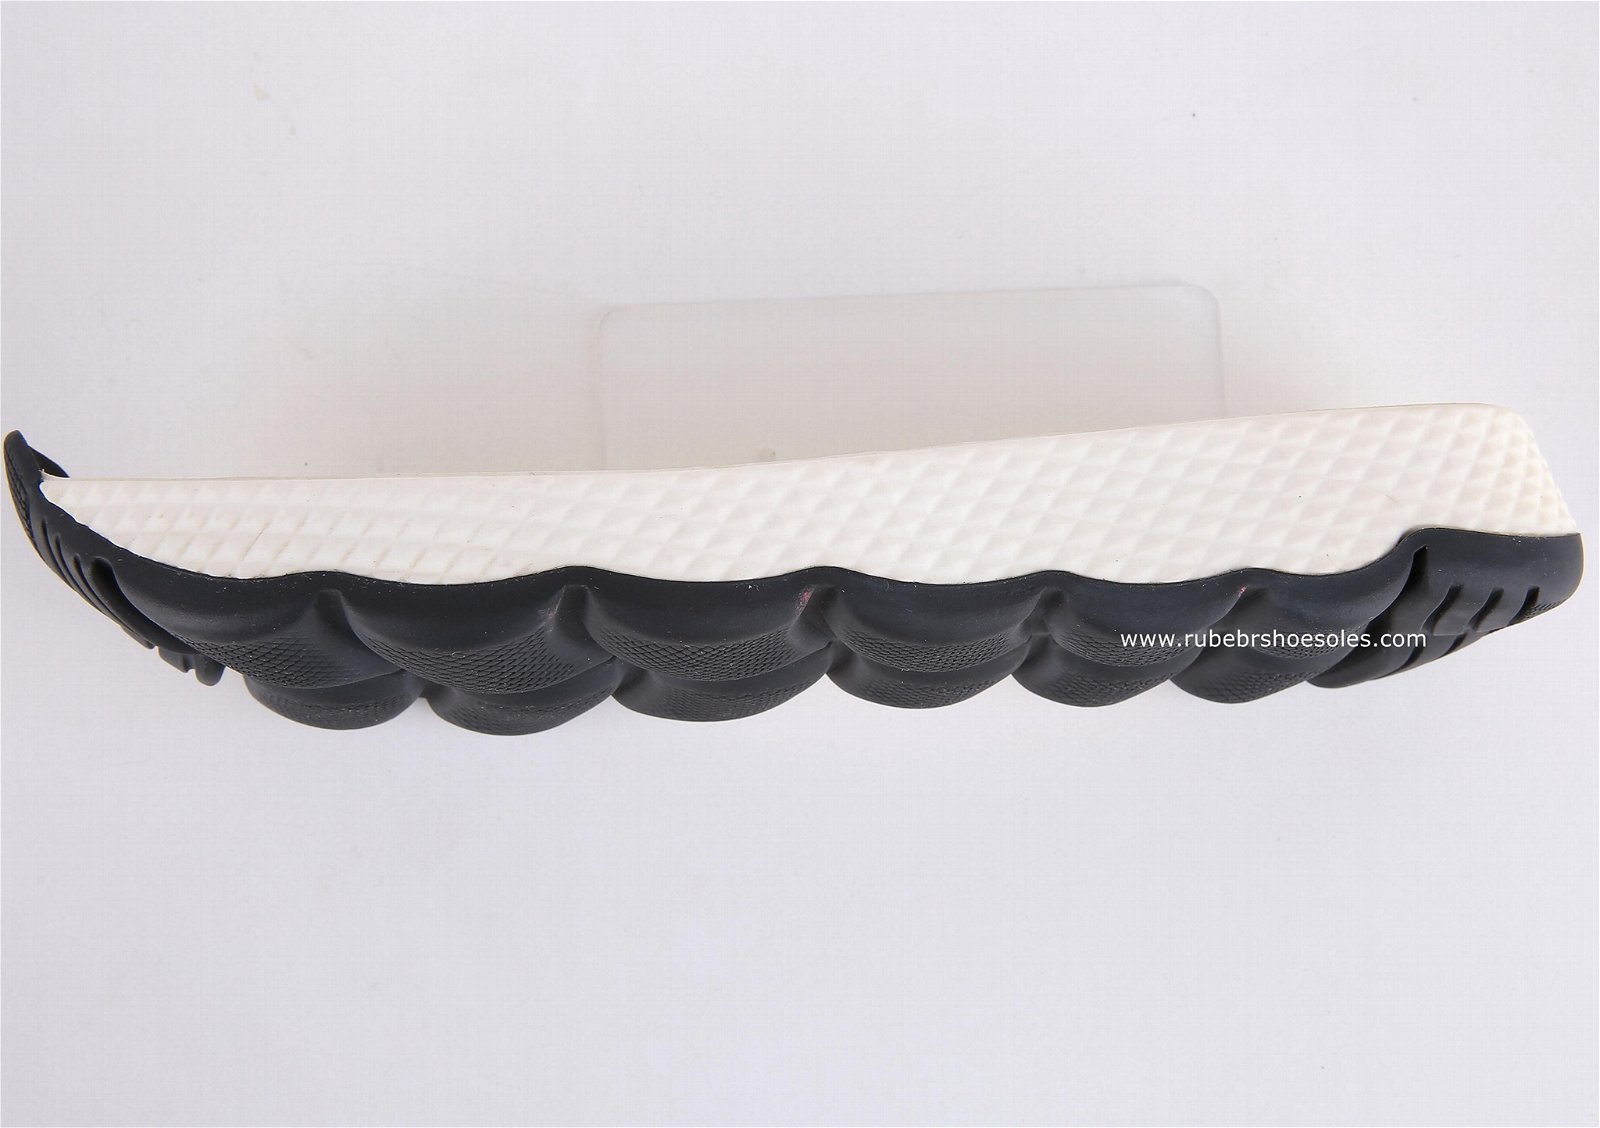 High quality vulcanized sole crepe rubber flexible rubber sole 3